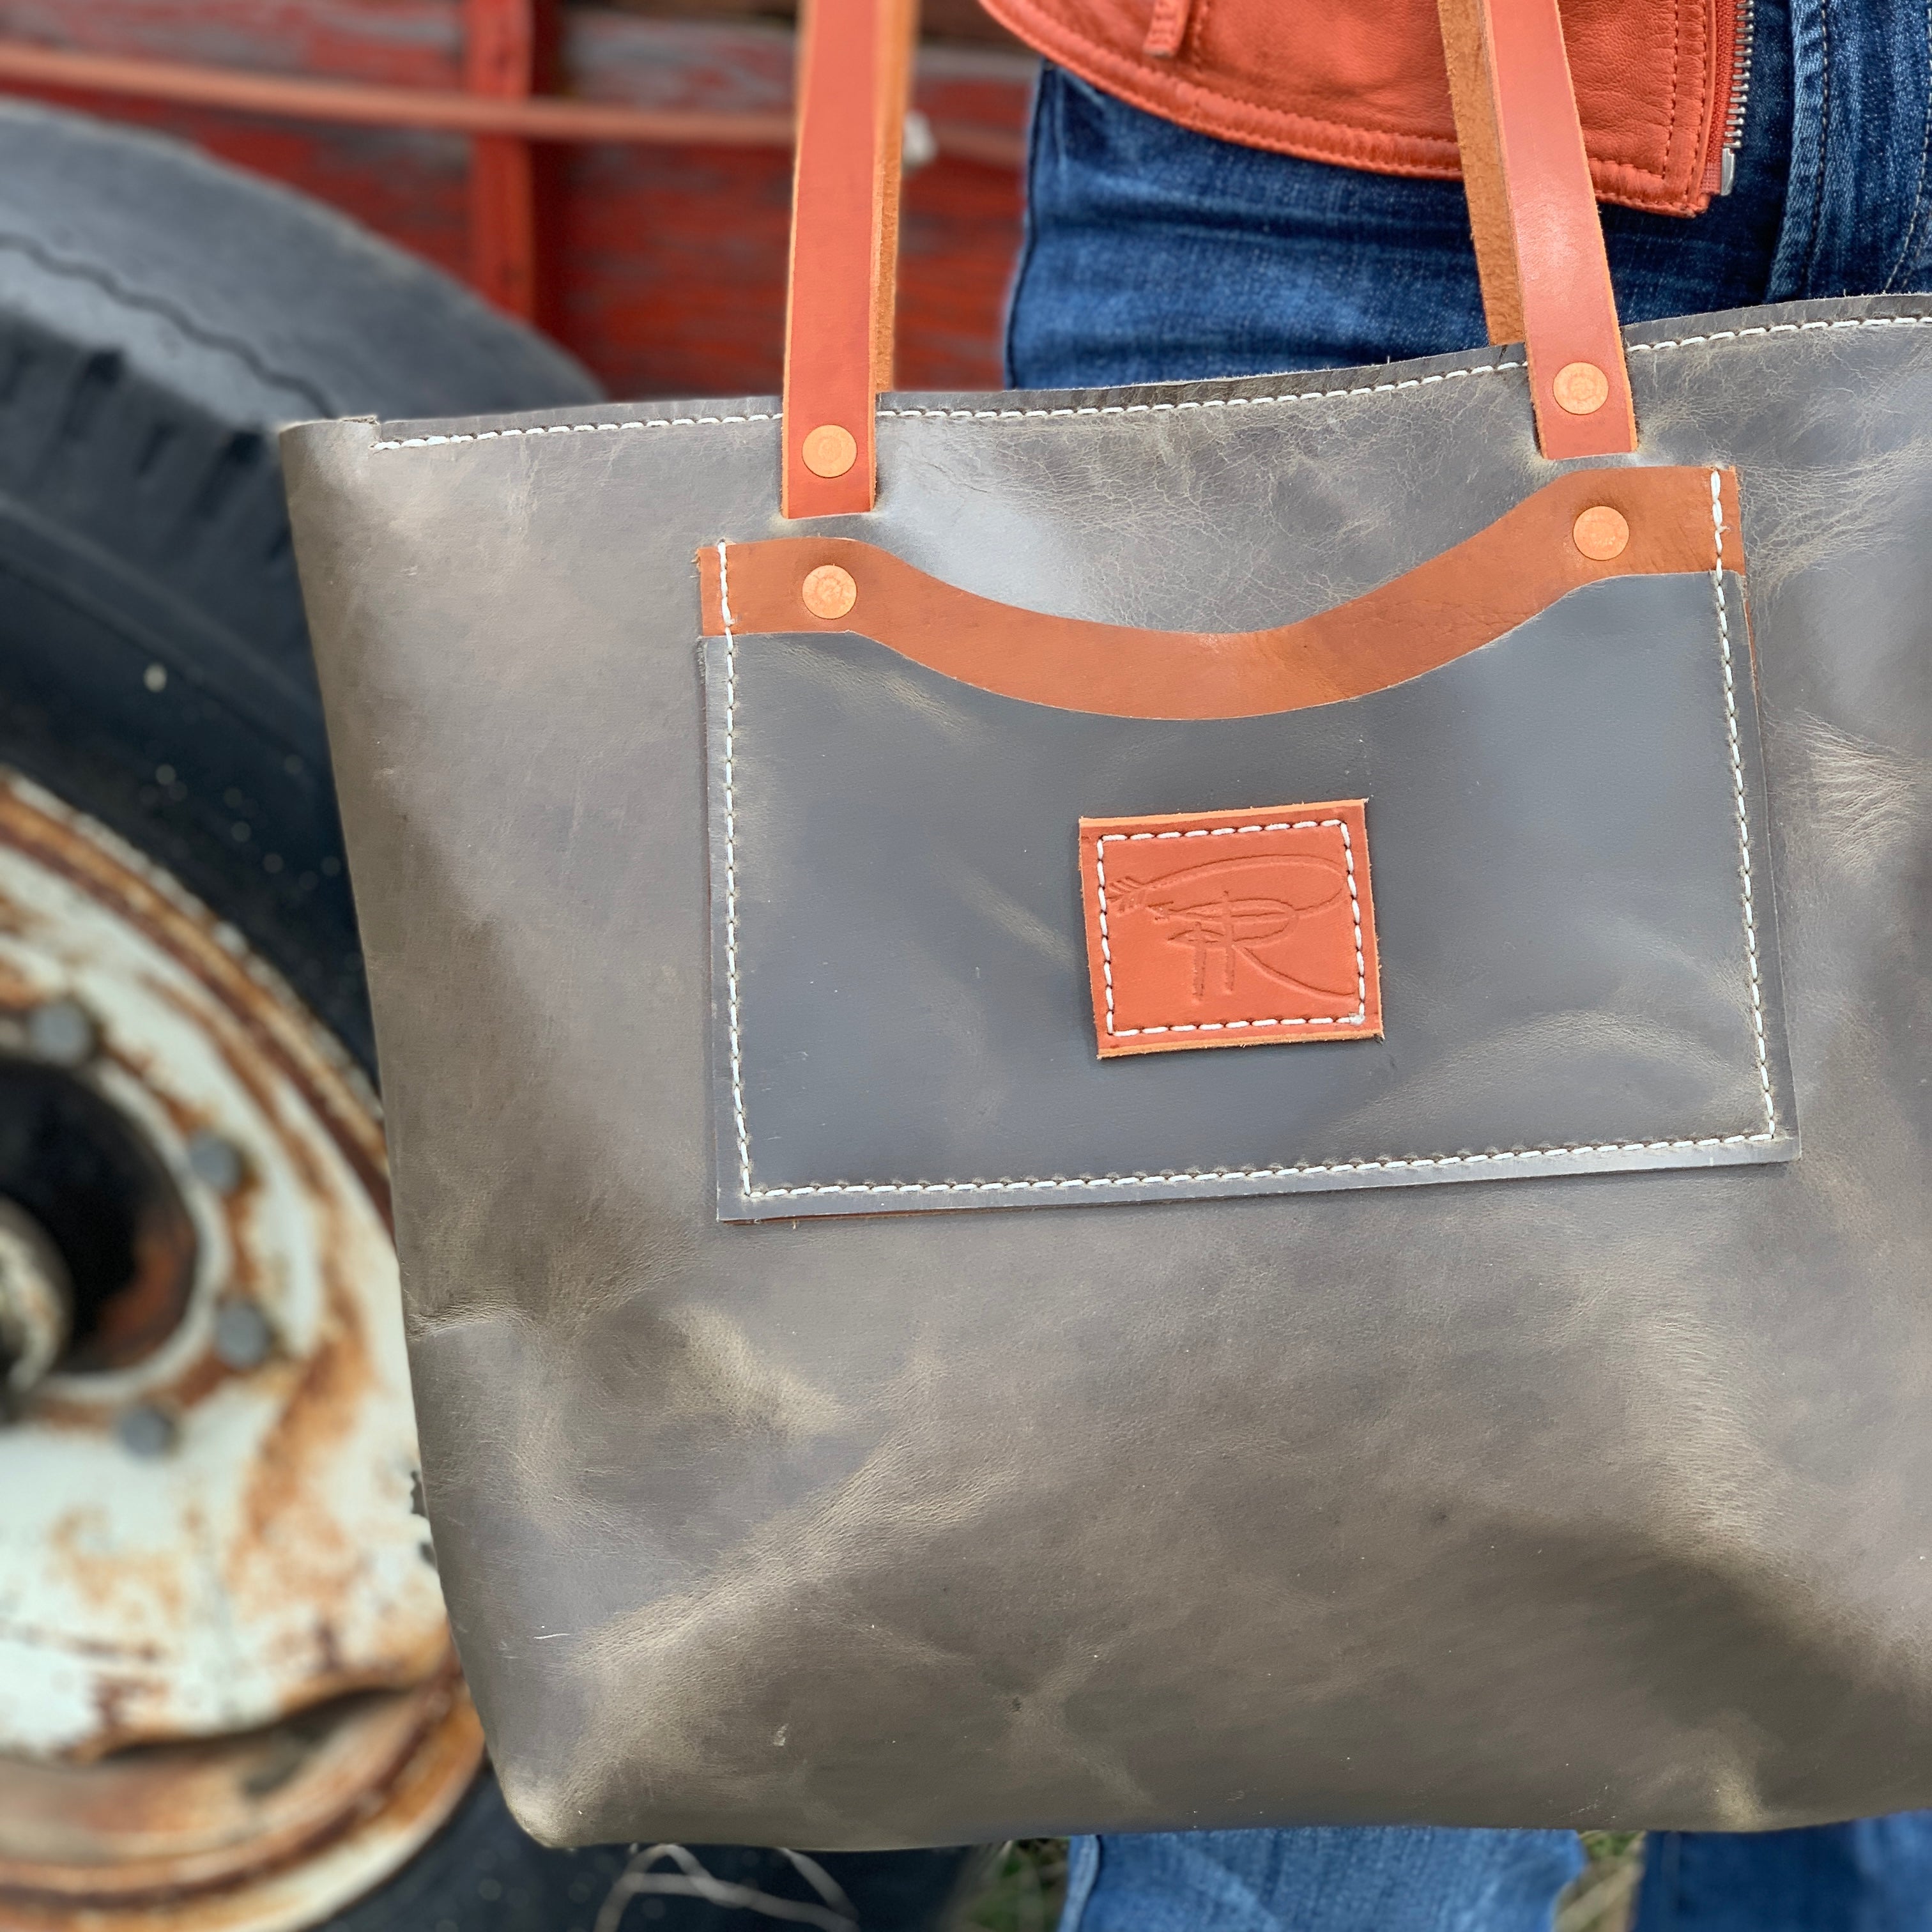 tote bag gift ideas leather shop leather work lake coeur d alene post falls boutique handcrafted usa northwest handmade spokane birthday graduation gift shop jewelry shop